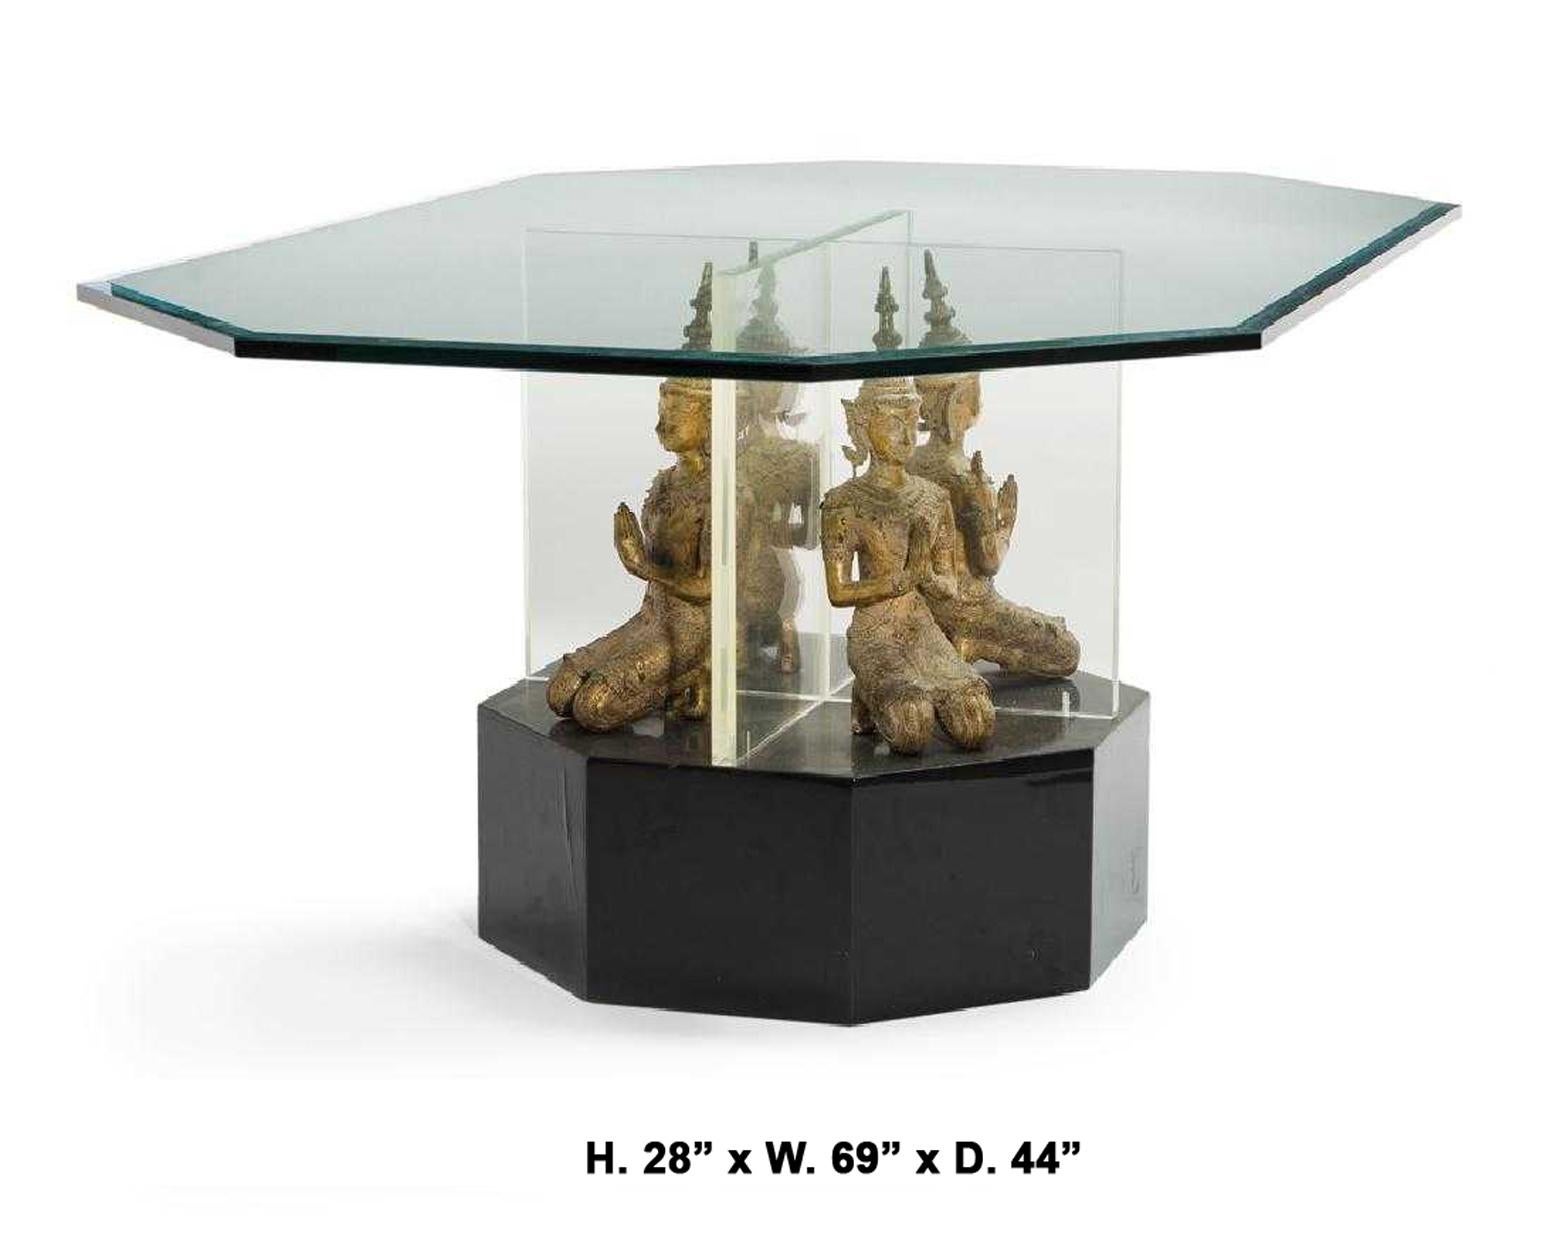 Unique contemporary glass center table with Thai Buddha base. 
The beveled and elongated octagonal glass top rests above a Lucite support with four seated gilt metal Thai Buddas, terminating in a conforming ebonized wooden base. 
20th